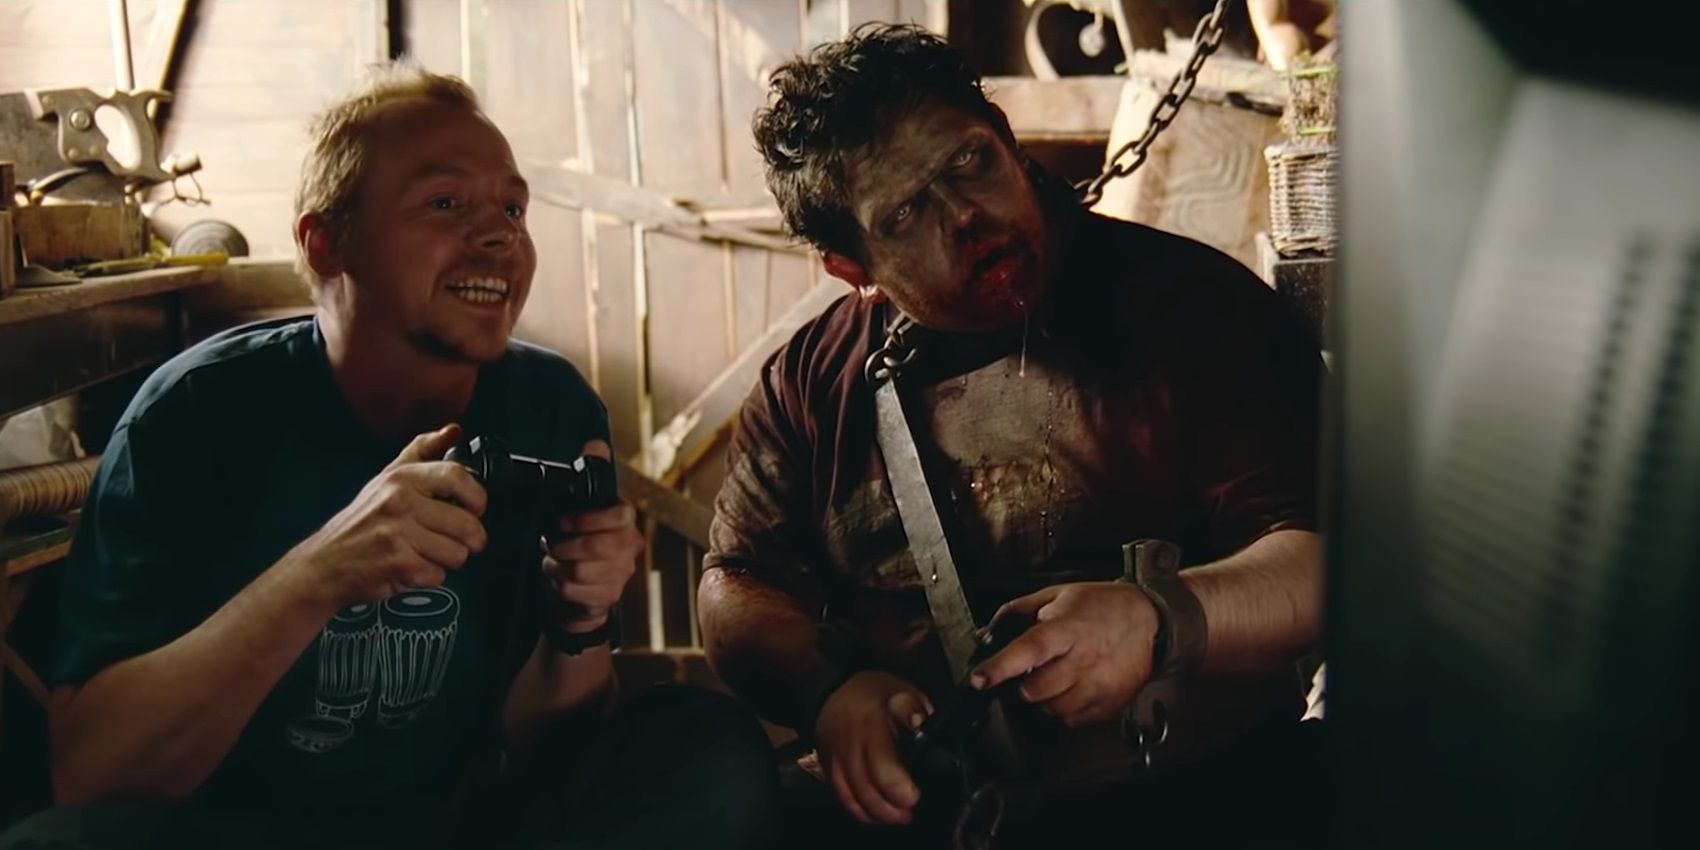 Shaun and Ed in the final scene of Shaun of the Dead